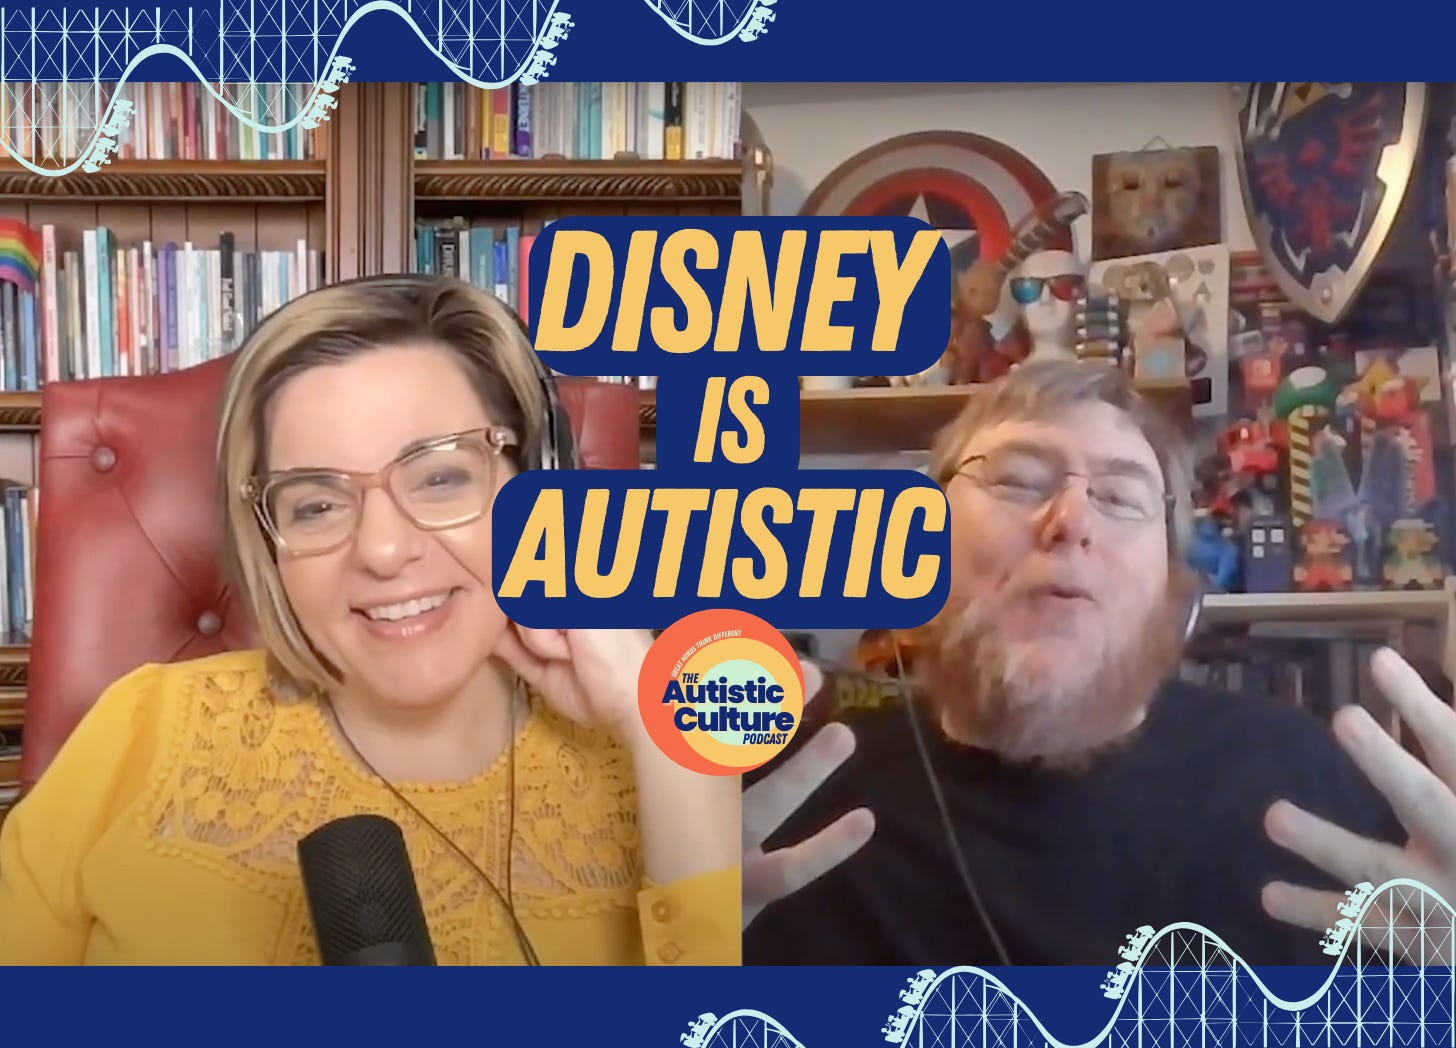 Listen to Autistic podcast hosts discuss: Disney is Autistic. Autism podcast | Without Autism, there would be no Disney – at least not like we know it today! Join us as we dive deep on one of the most globally recognized Autistic celebrities!